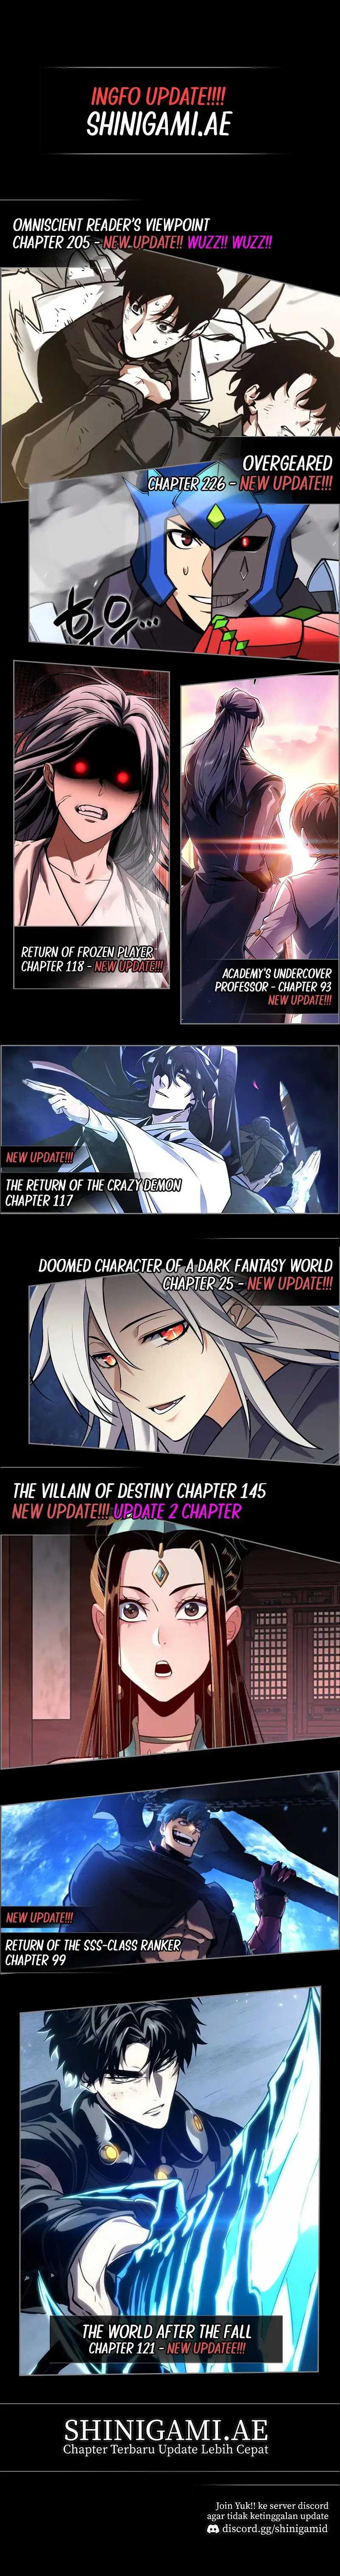 Reborn as a Heavenly Martial Demon Chapter 12